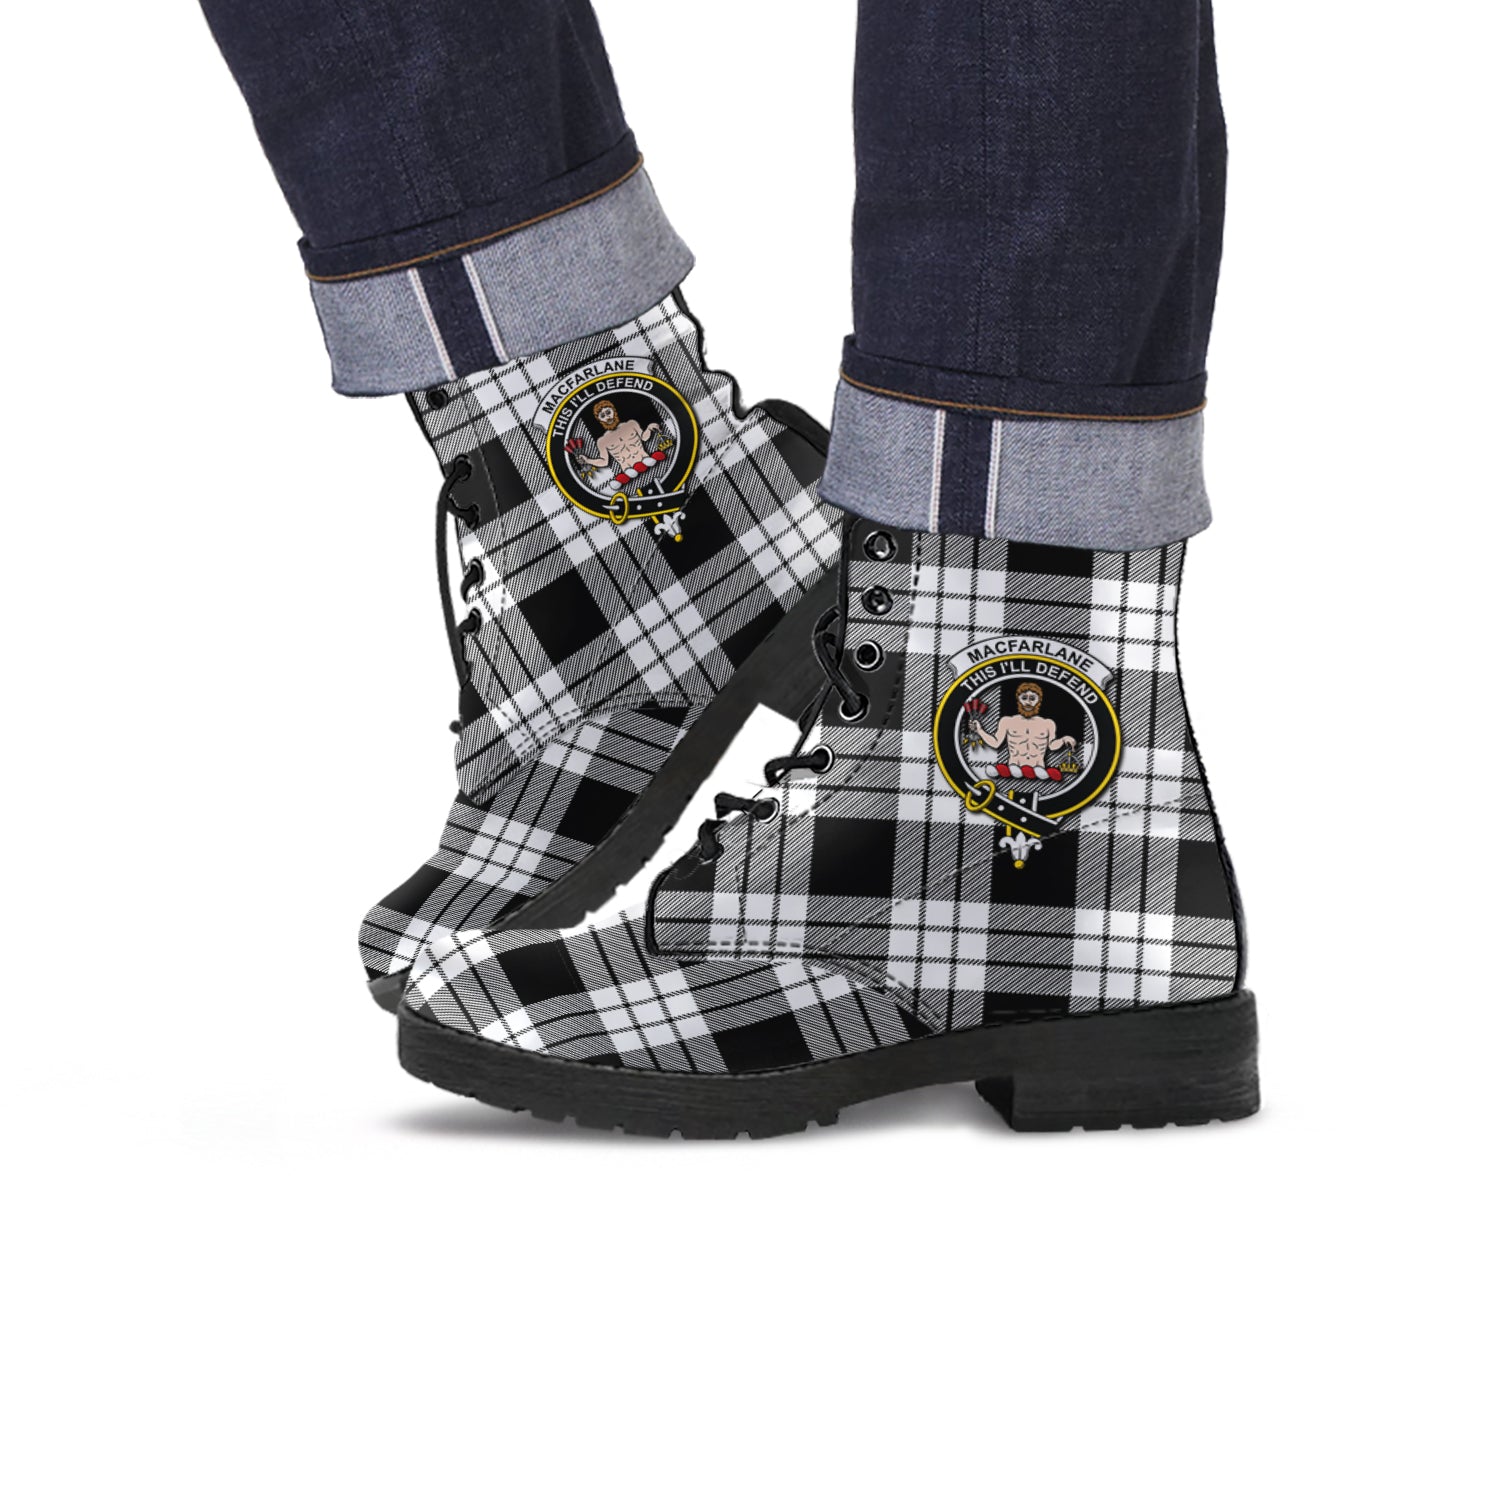 macfarlane-black-white-tartan-leather-boots-with-family-crest